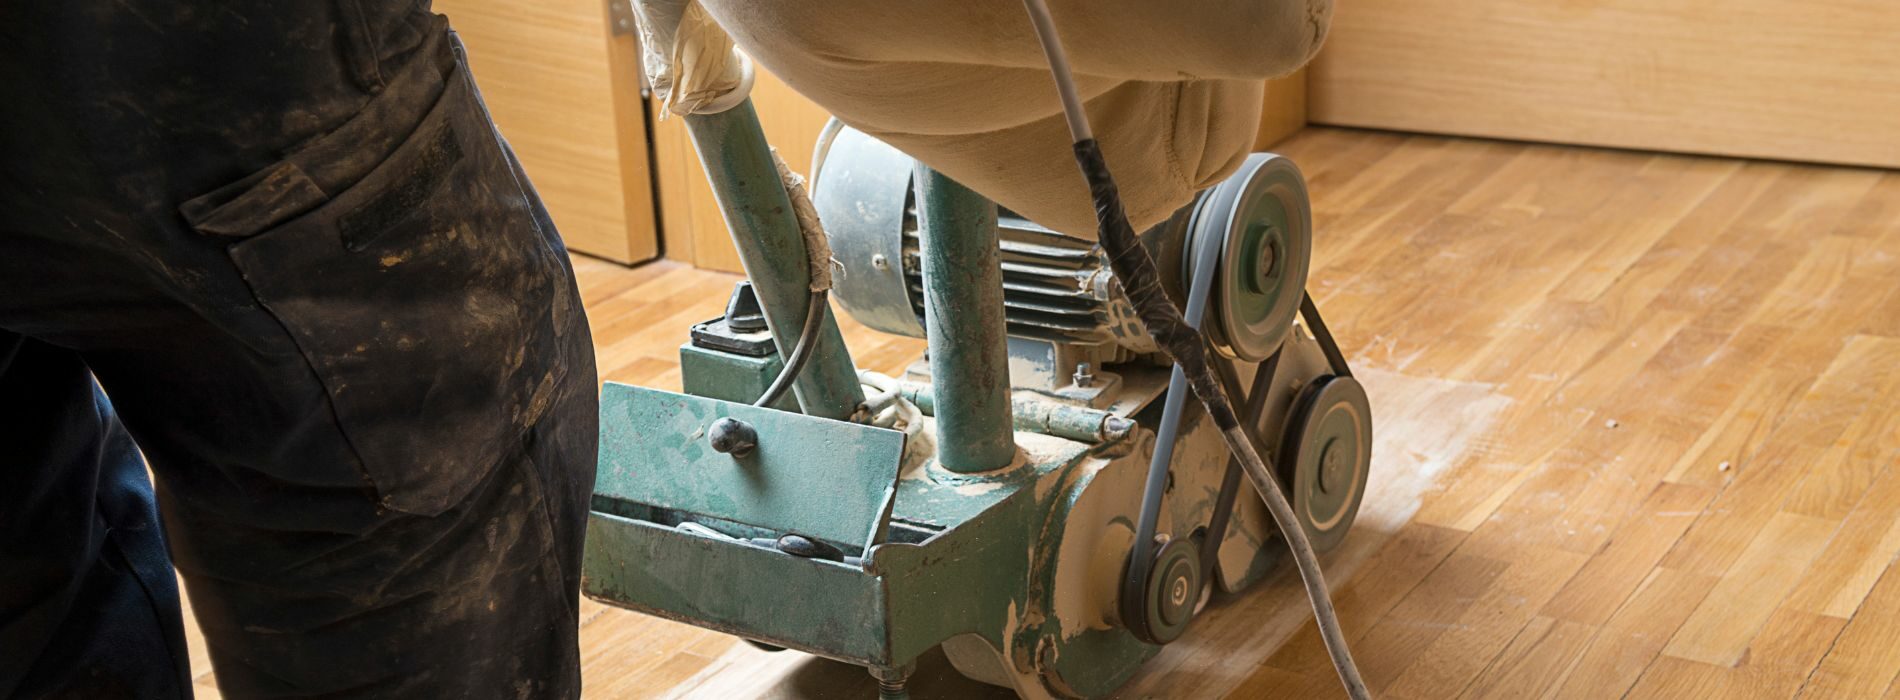 a person working on a machine on a hard wood floor.